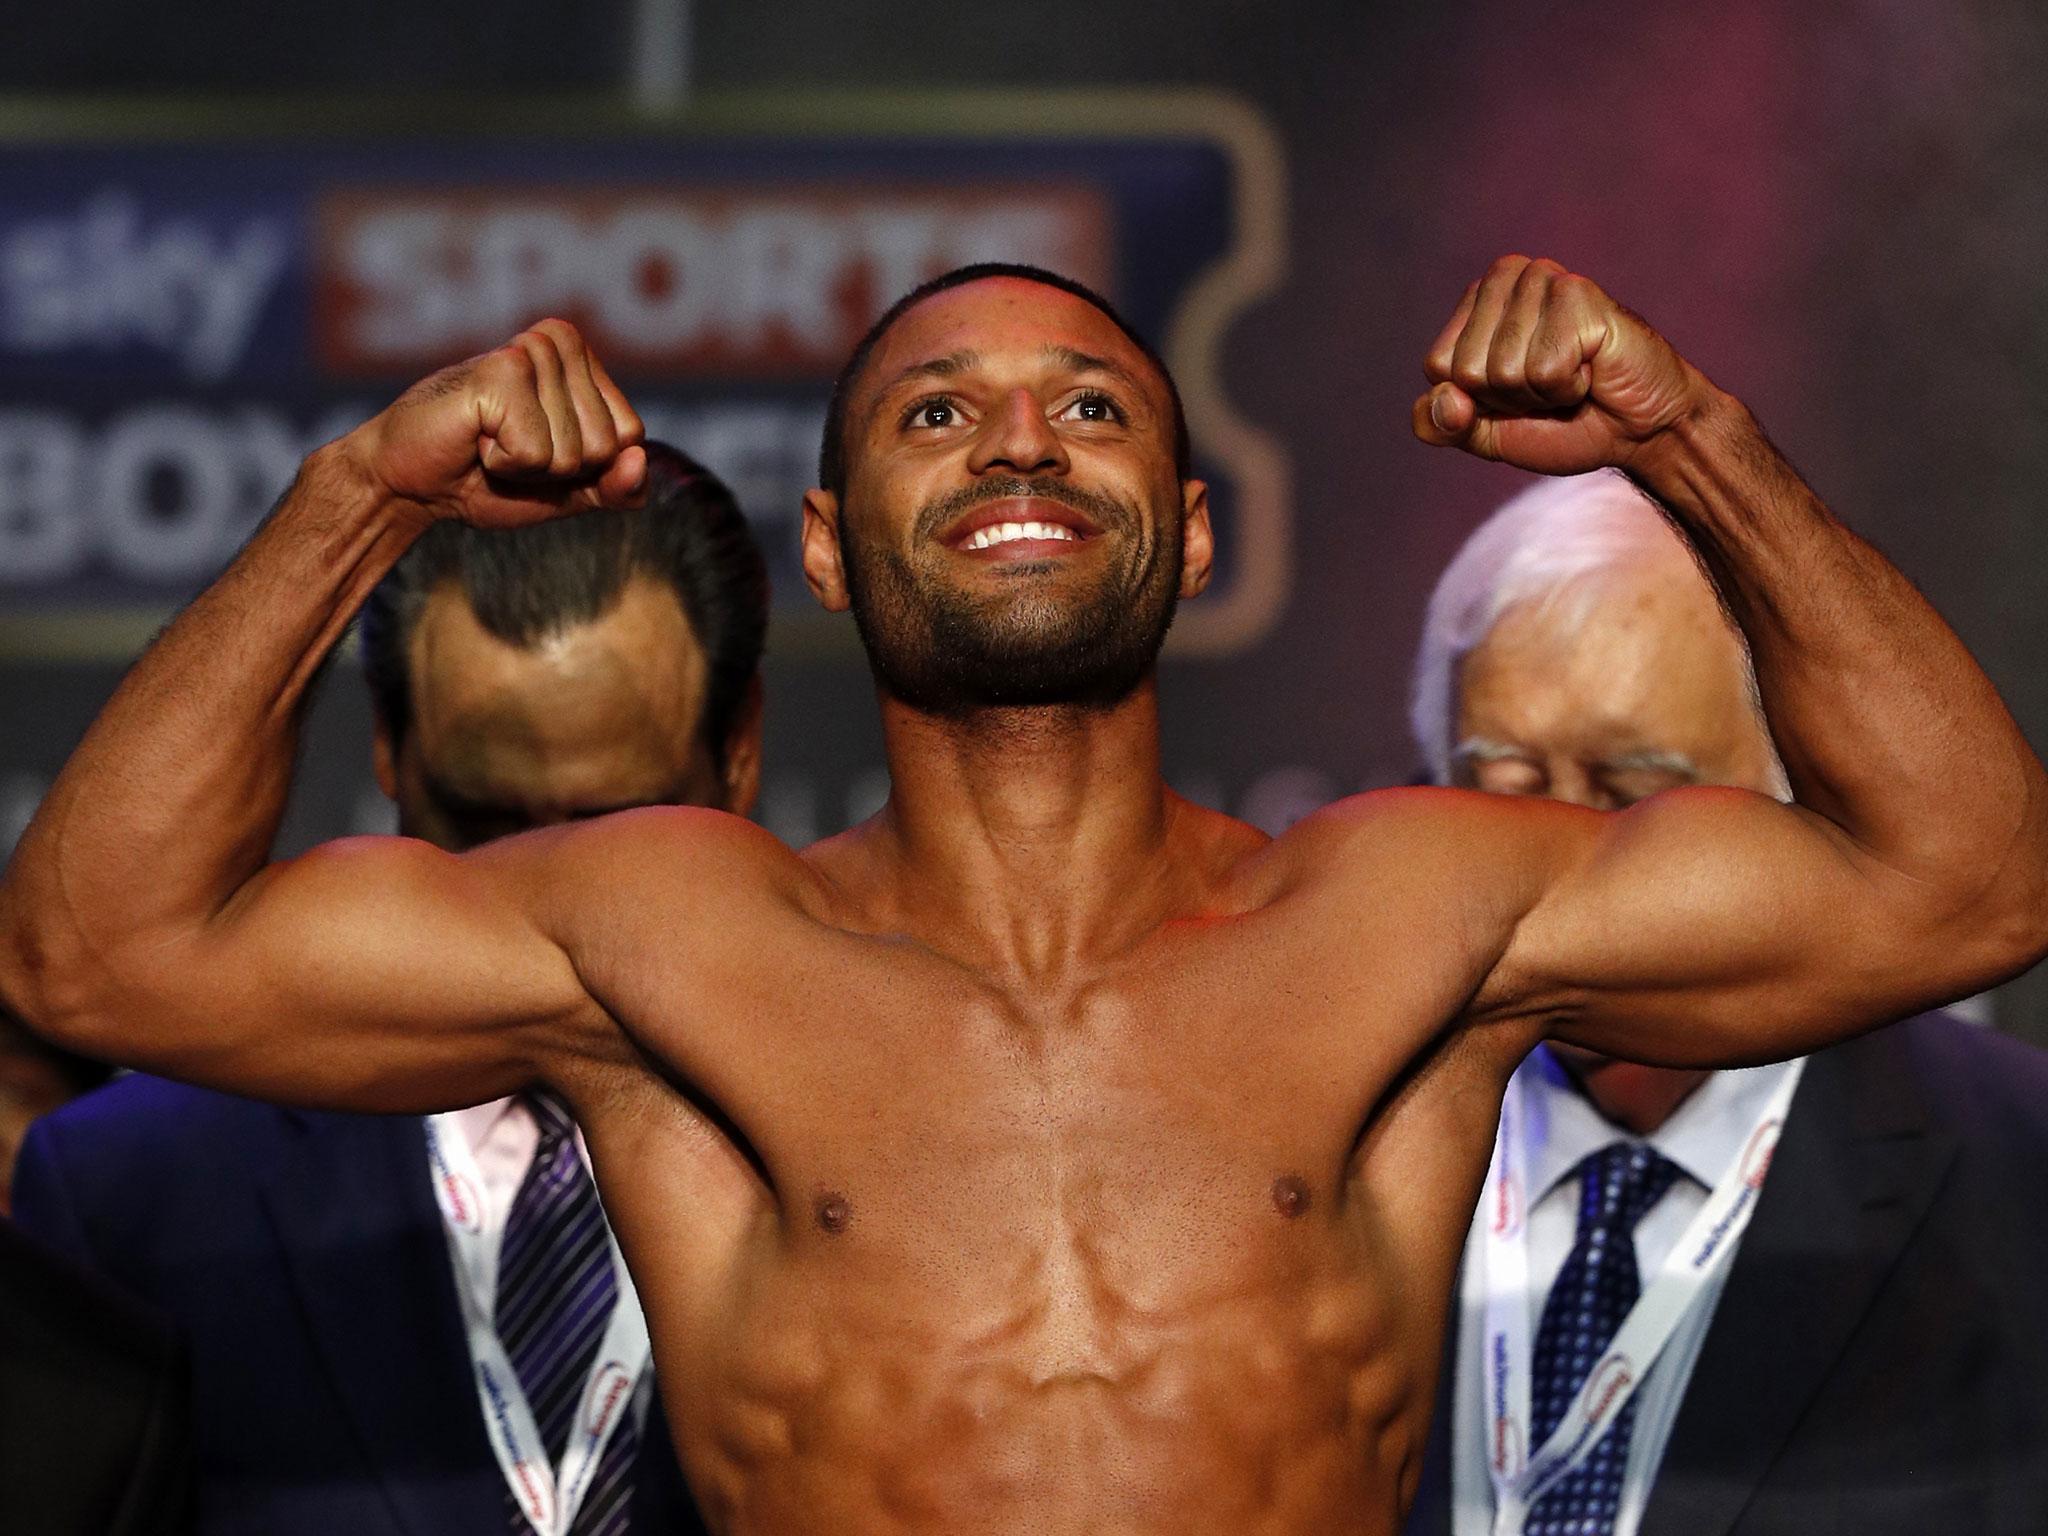 Kell Brook will fight Errol Spence Jr in defence of his IBF welterweight world title